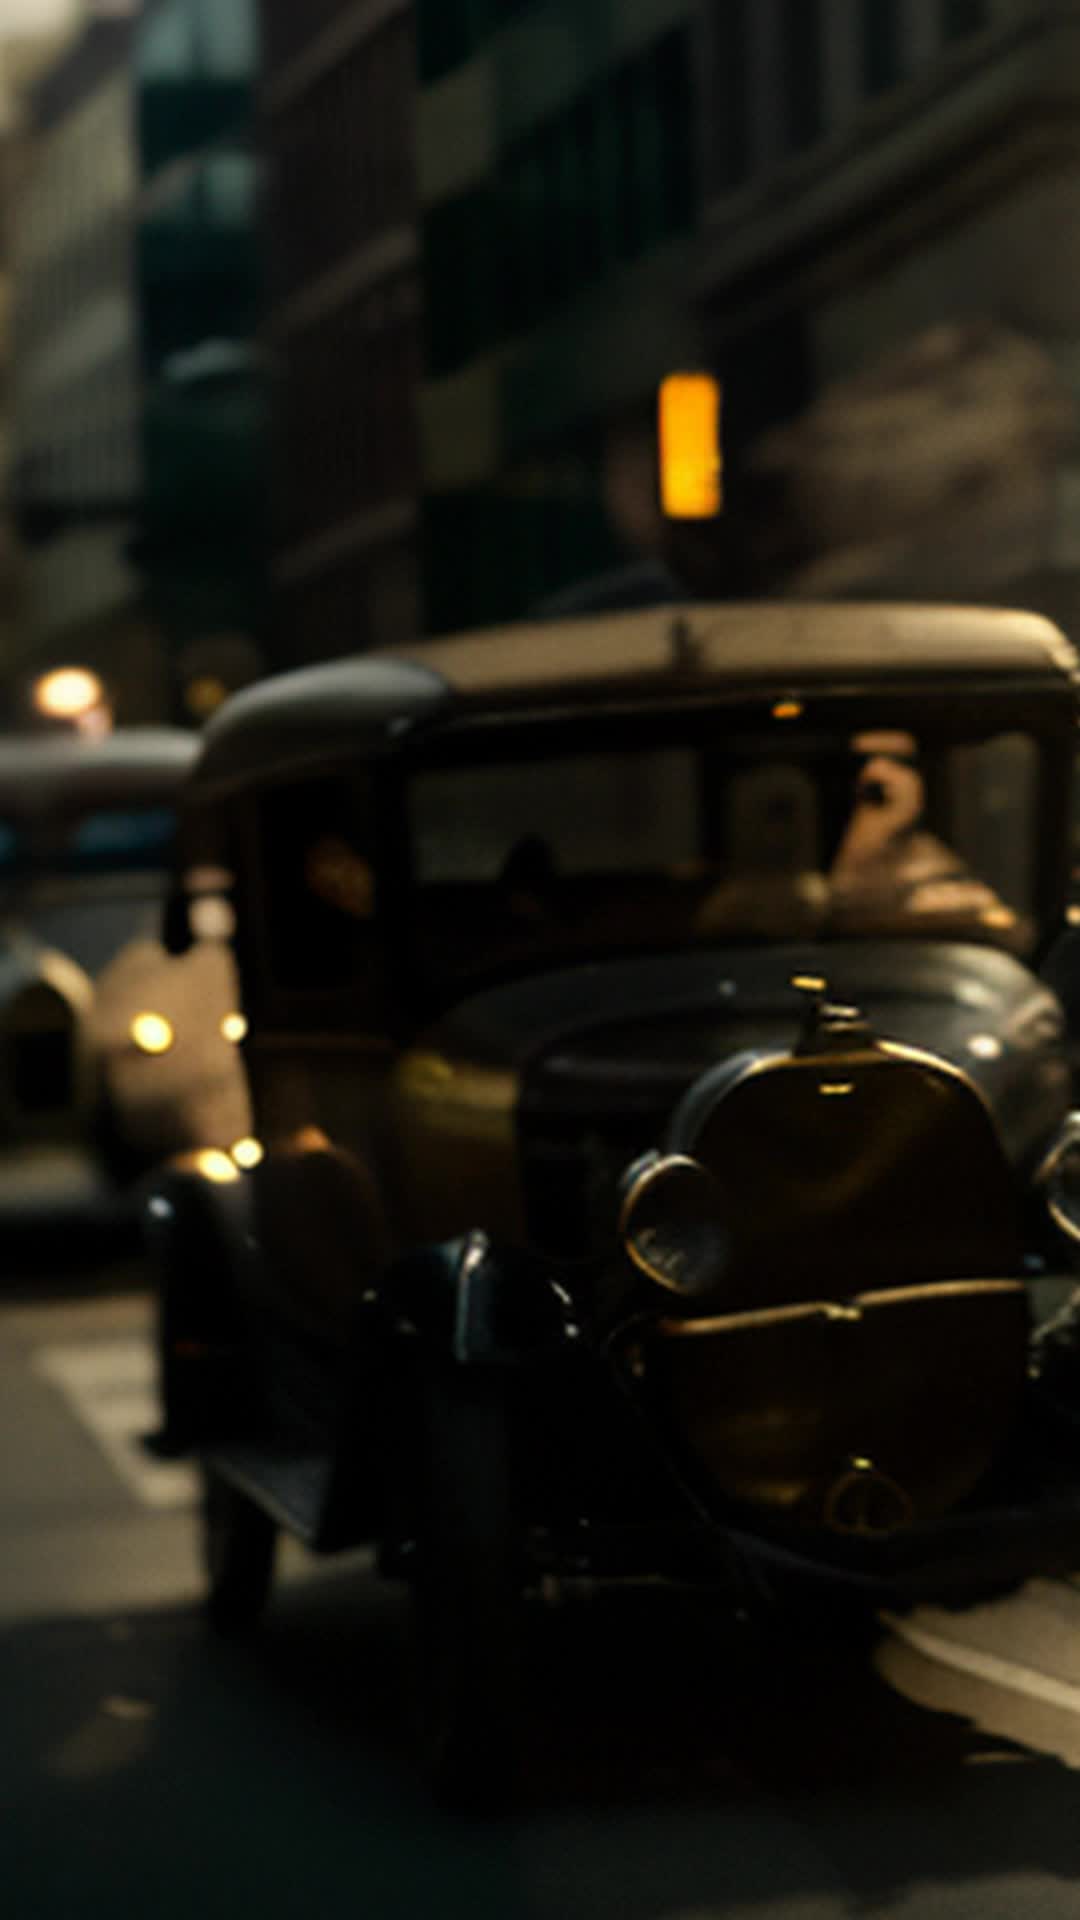 Journalist darting, bustling streets, roaring twenties ambiance, blending into chaos, soft shadows, intense chaos portrayed, sharp and detailed focus, high-speed motion, seamlessly integrating into busy 1920s street scene, vintage costumes and vehicles, soft, warm lighting from street lamps